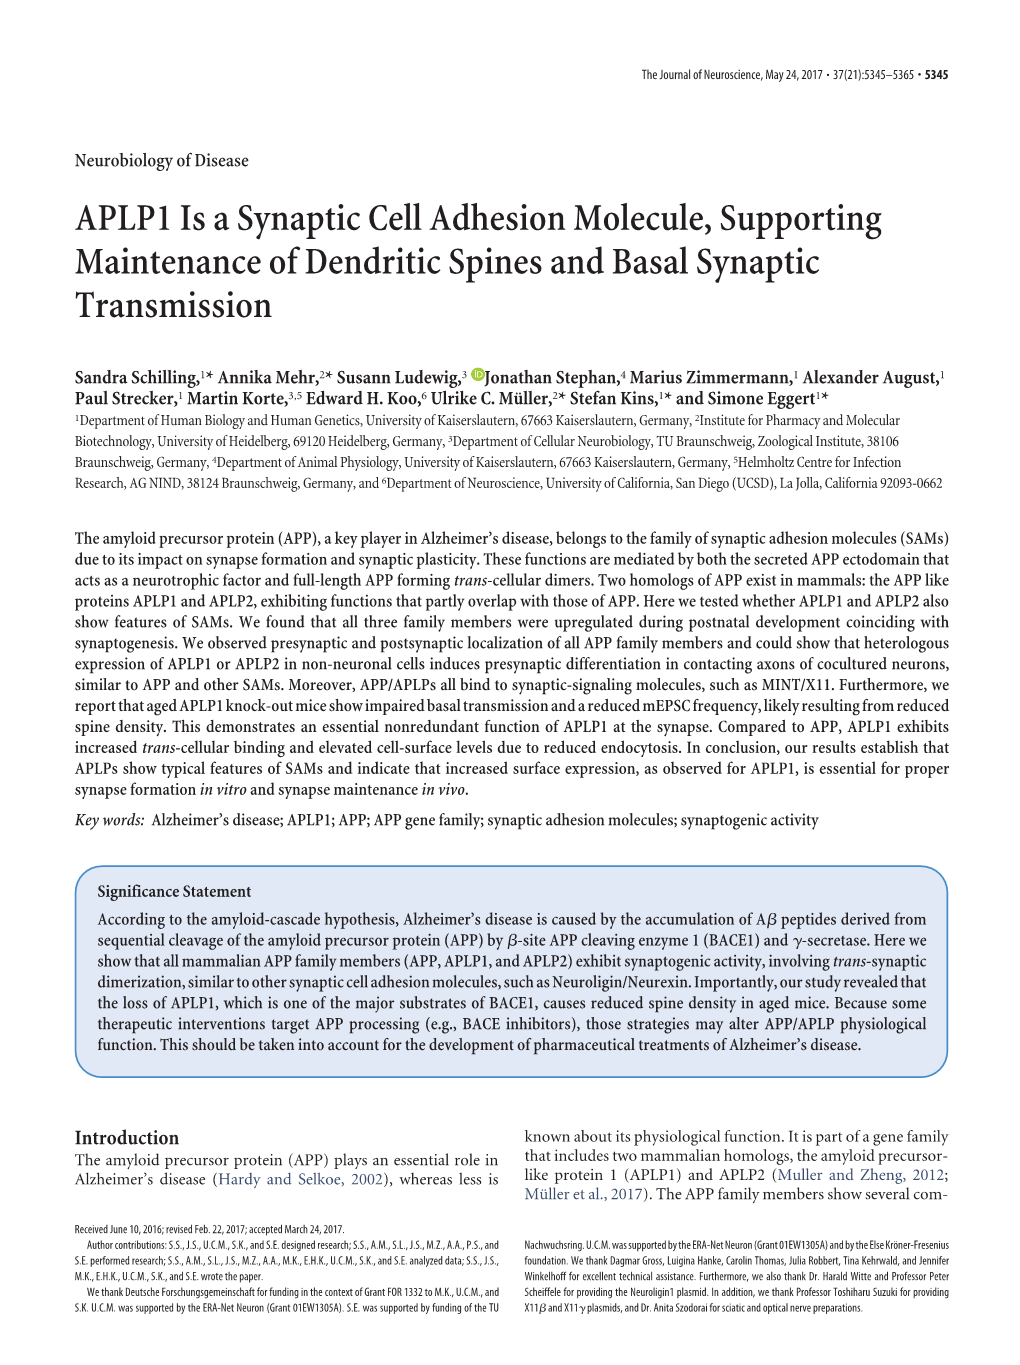 APLP1 Is a Synaptic Cell Adhesion Molecule, Supporting Maintenance of Dendritic Spines and Basal Synaptic Transmission